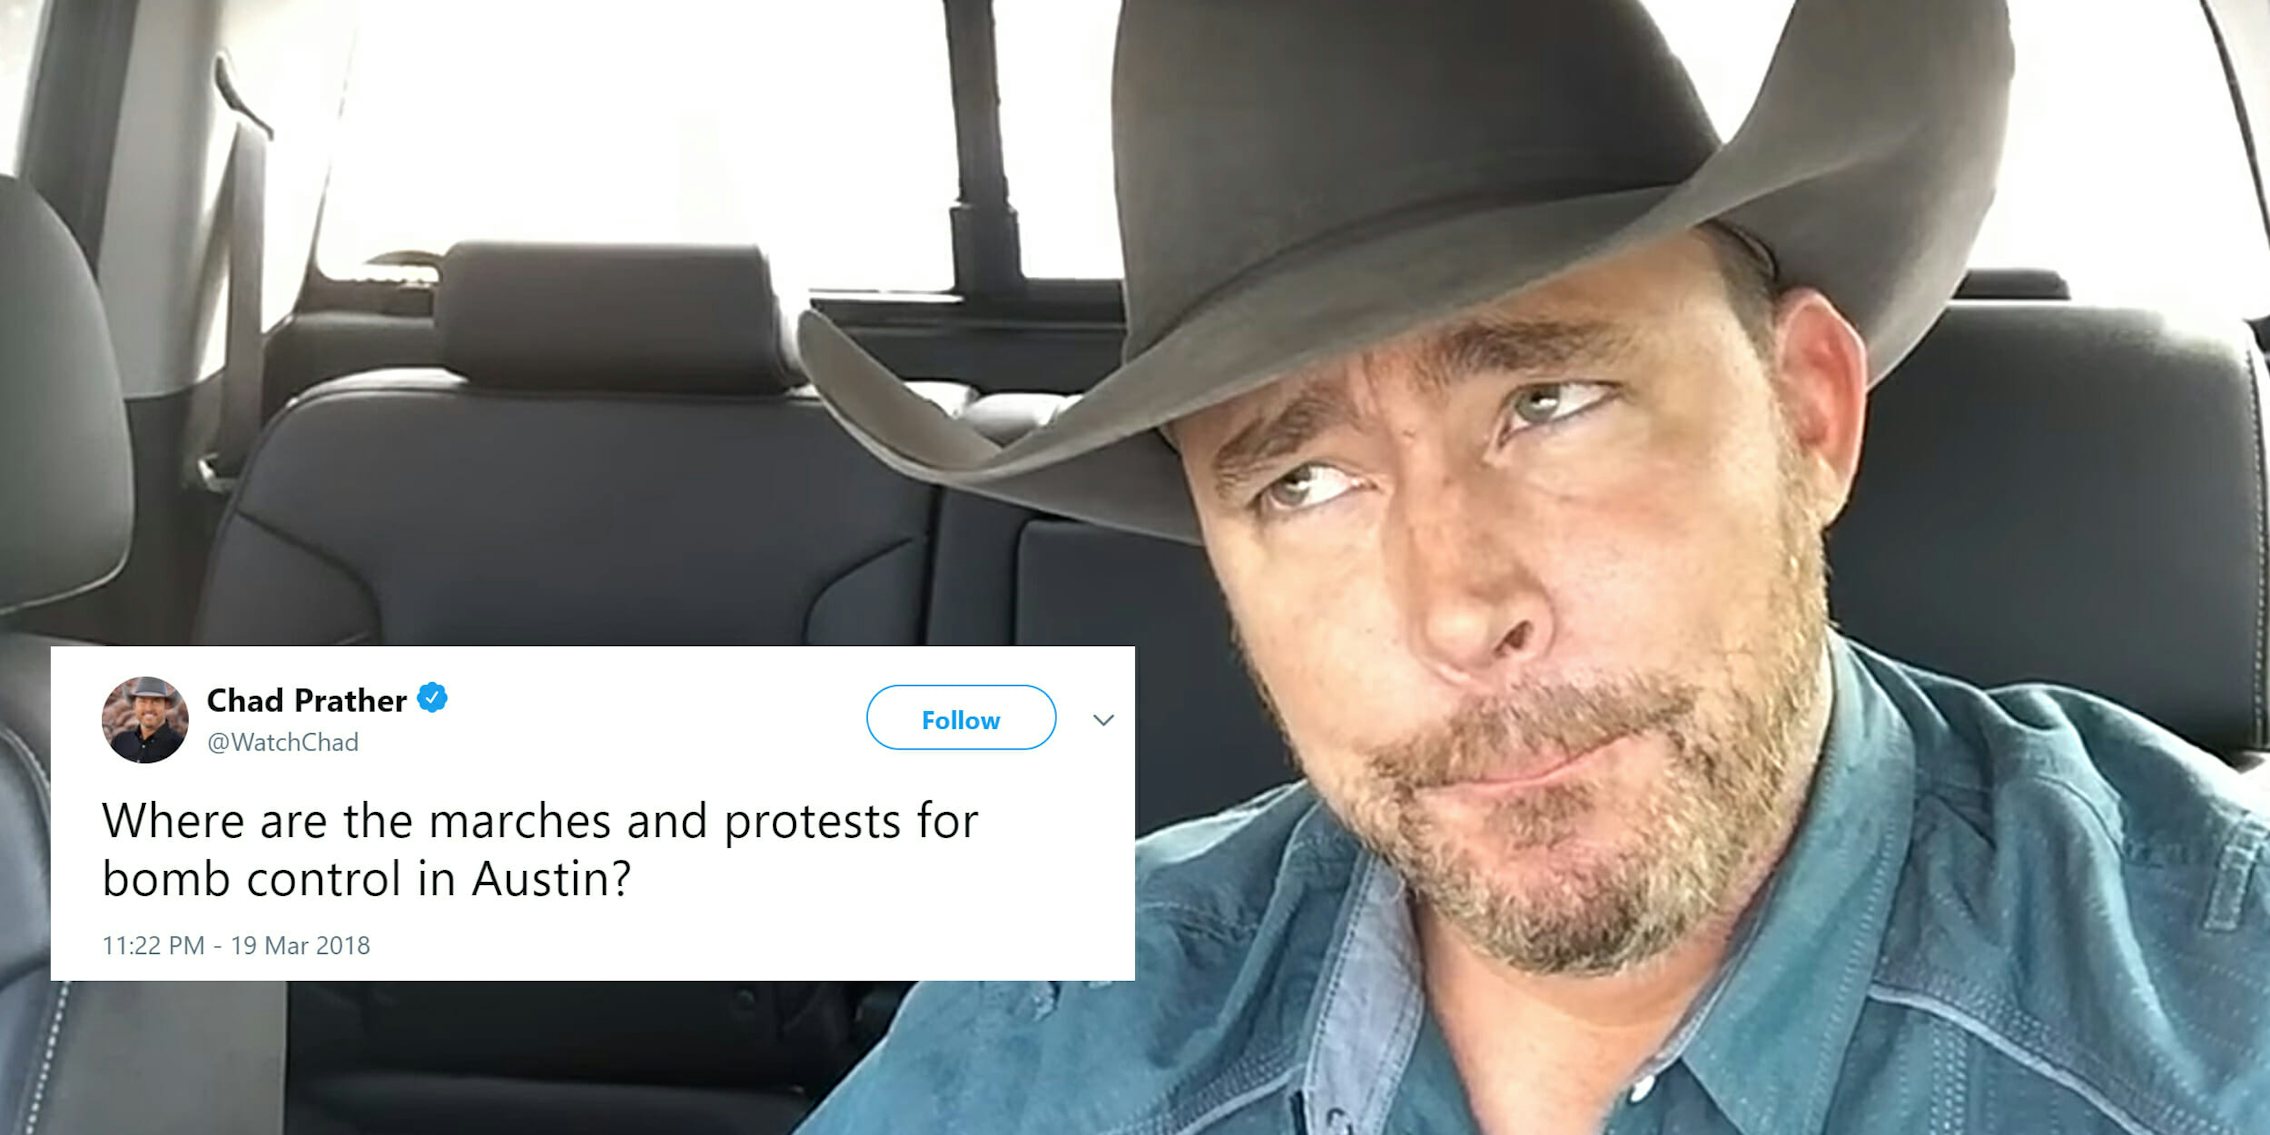 Chad Prather Roasted For Tweet Asking About Austin Bombing Marches